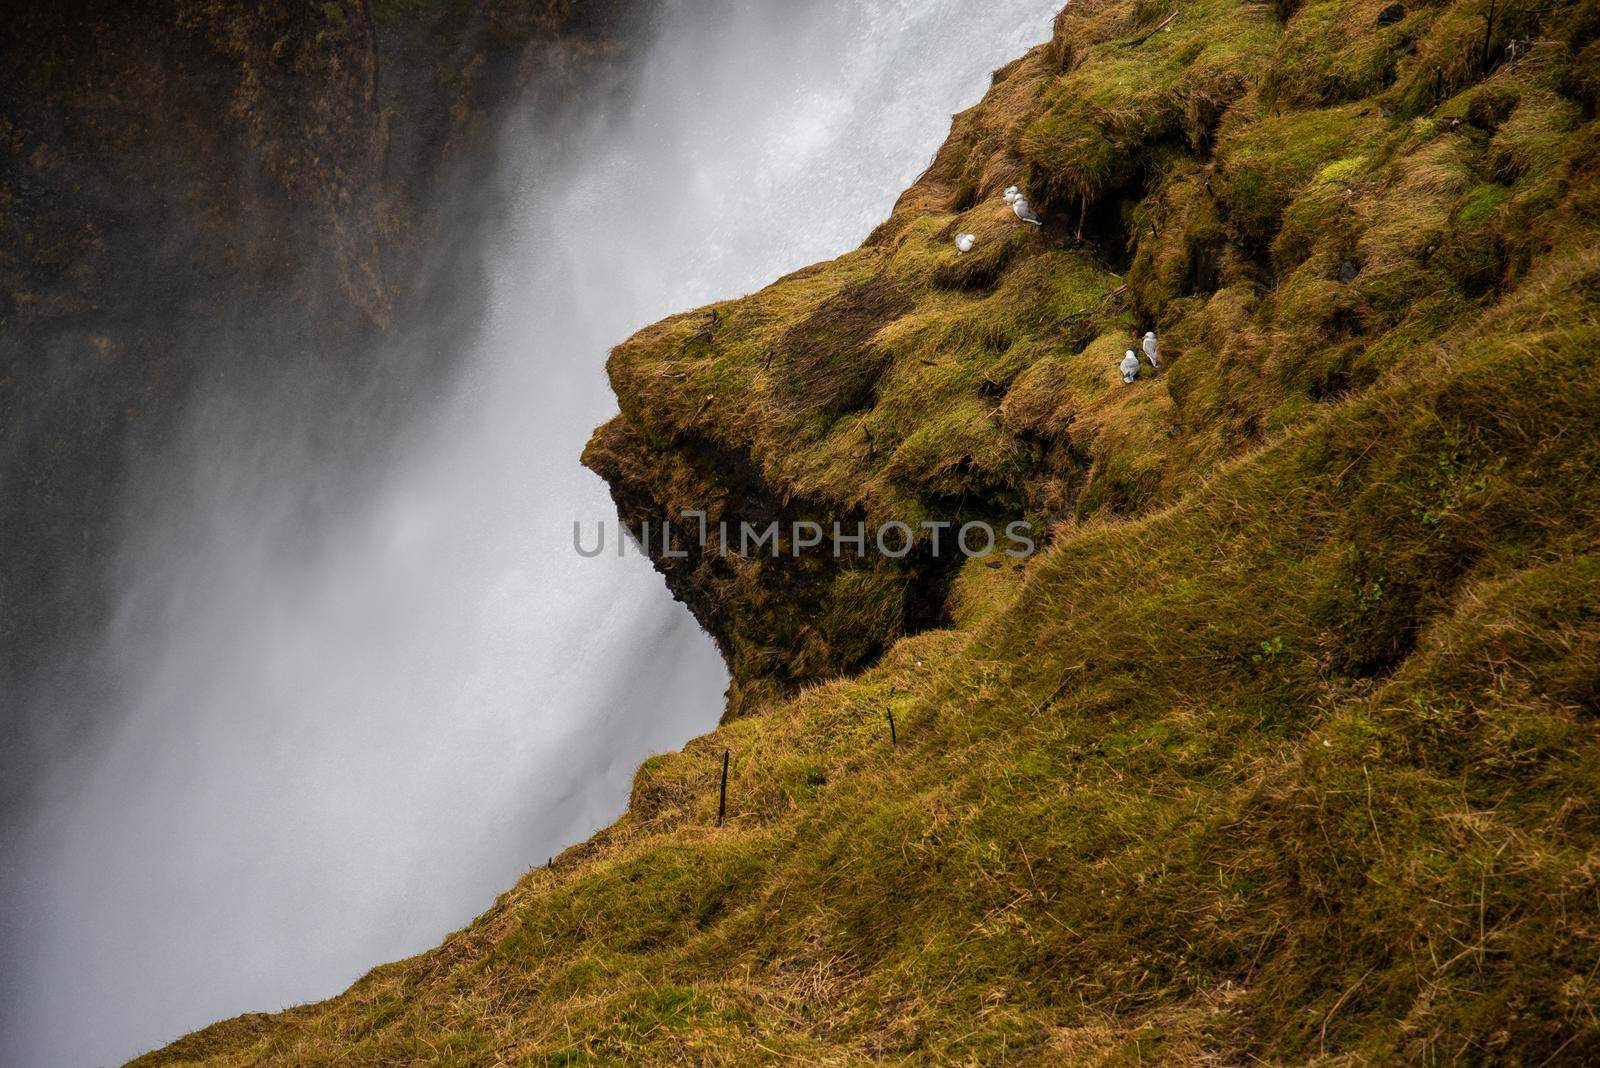 Close up of giant Icelandic waterfall from the top of a mossy cliff.